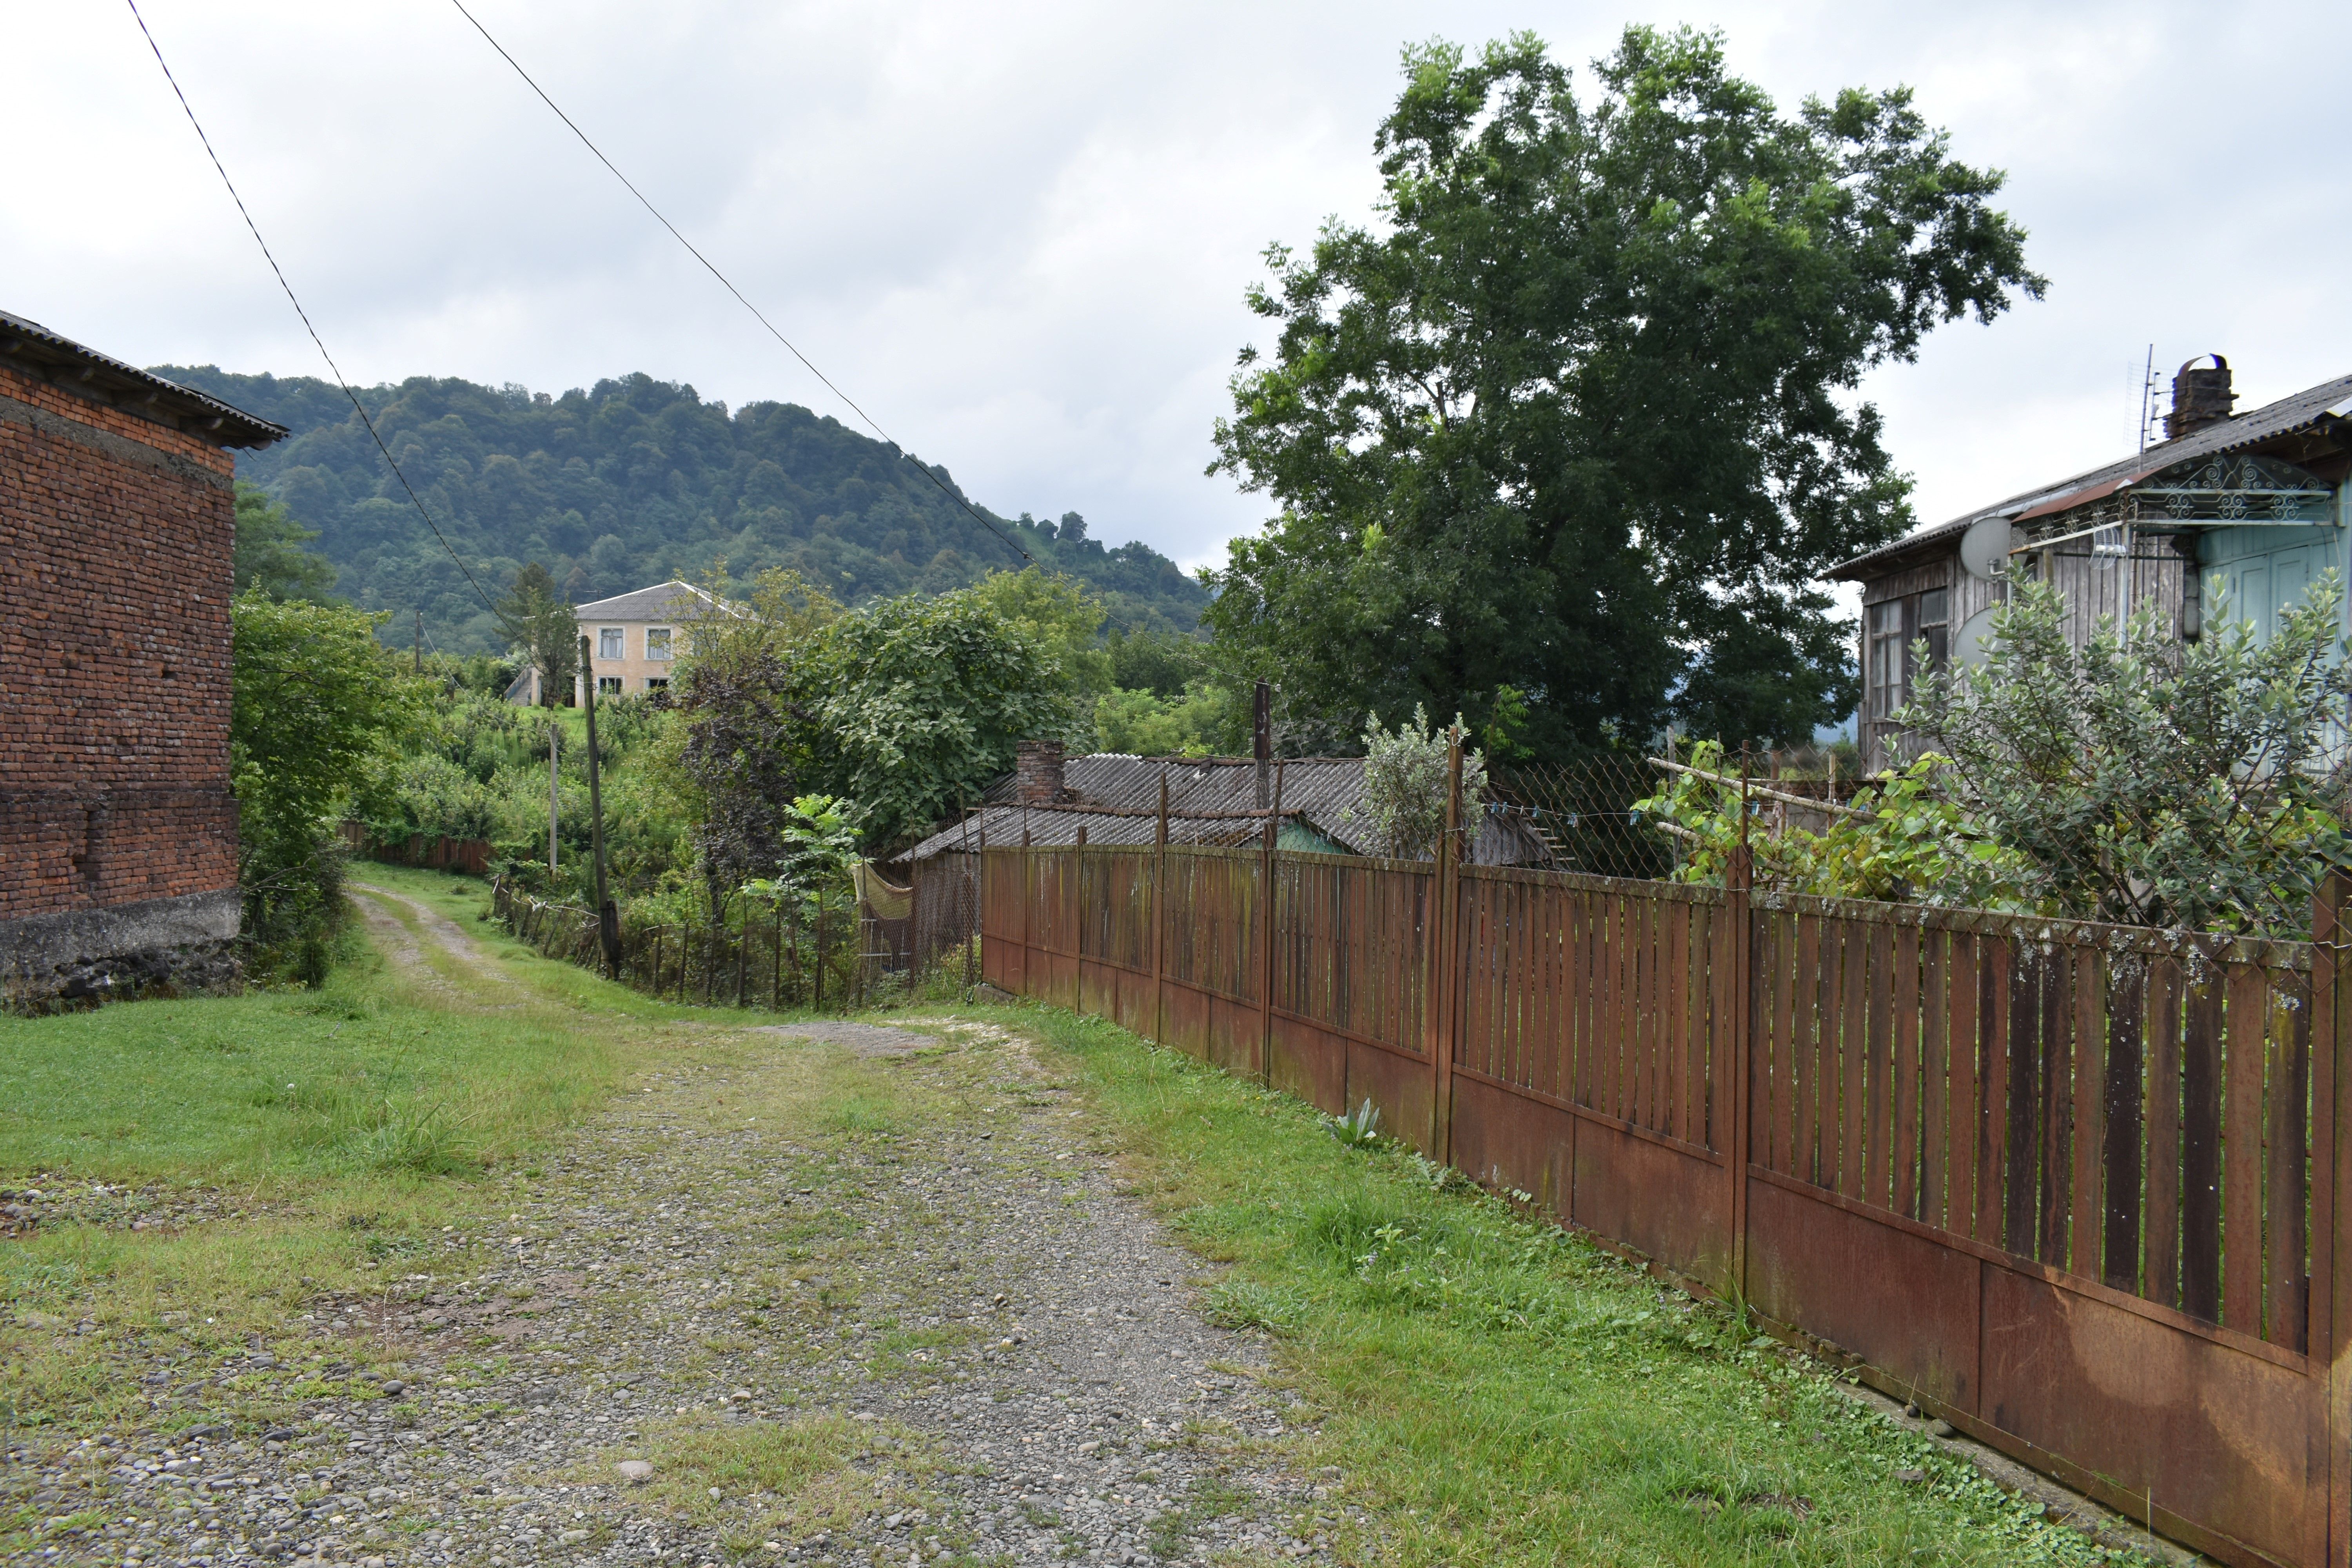 A village road in Guria. Image by Kaitlyn Johnson. Georgia, 2019.